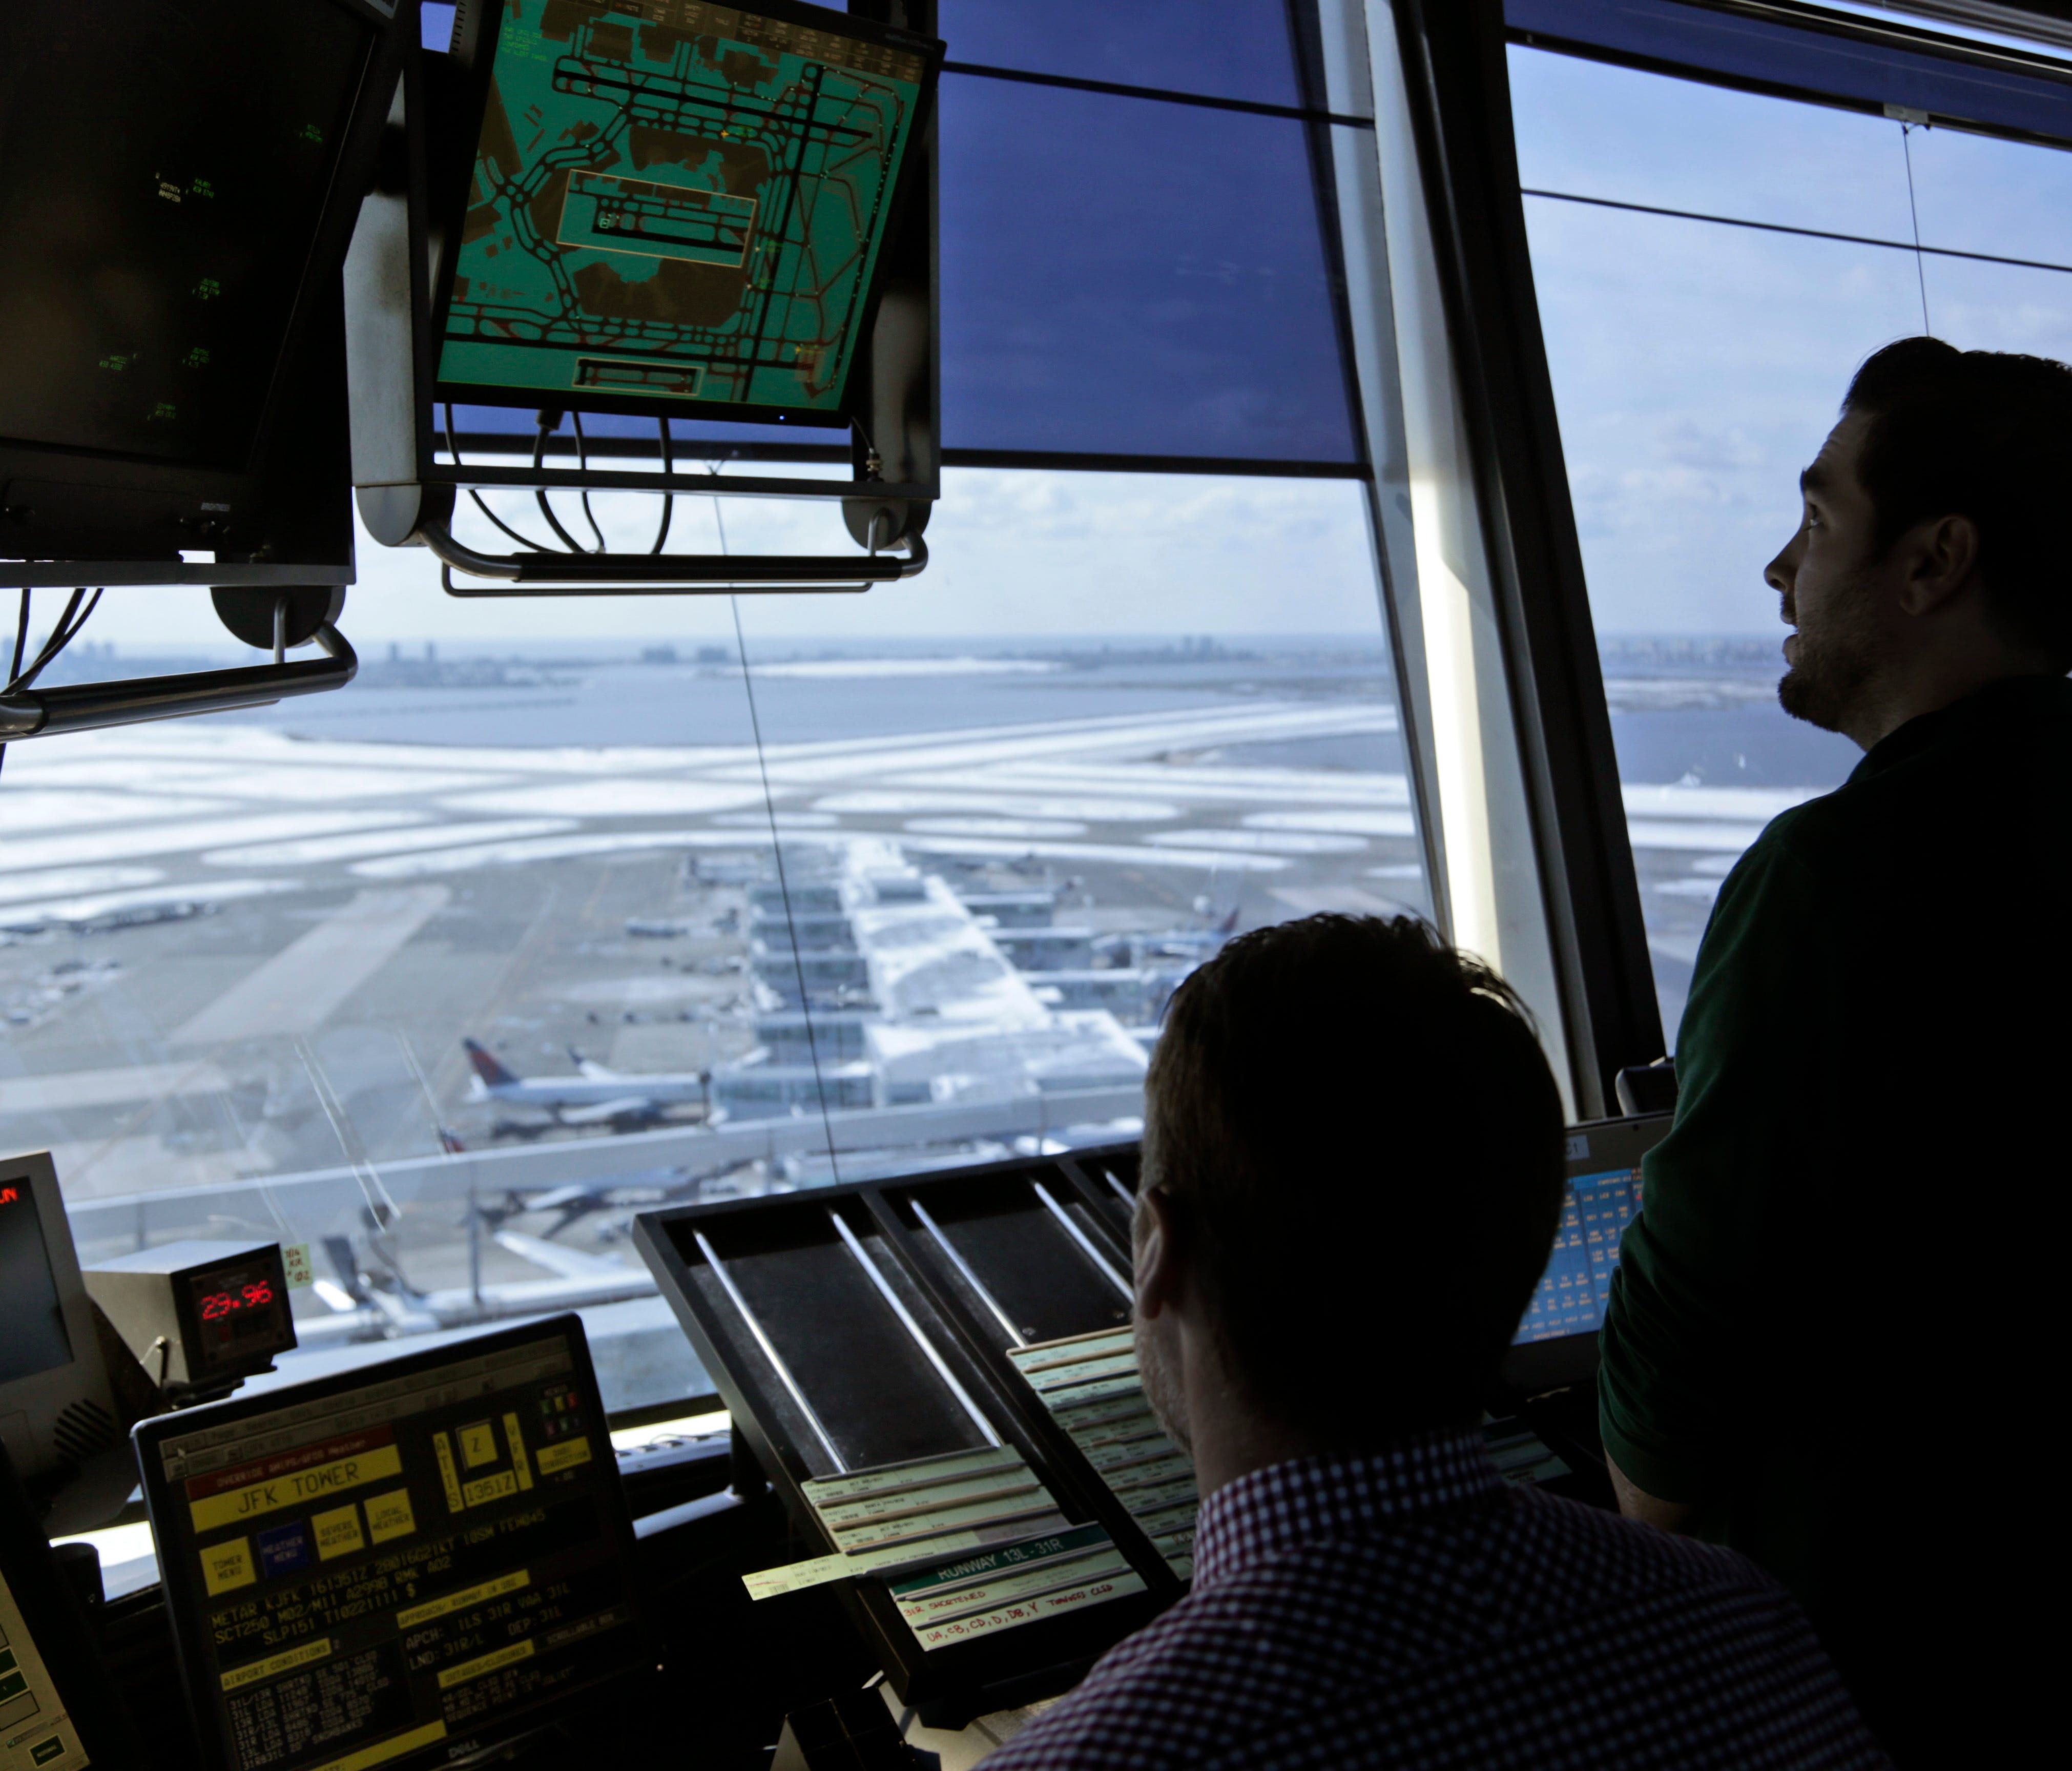 Air traffic controllers work in the tower at John F. Kennedy International Airport in New York on March 16, 2017.